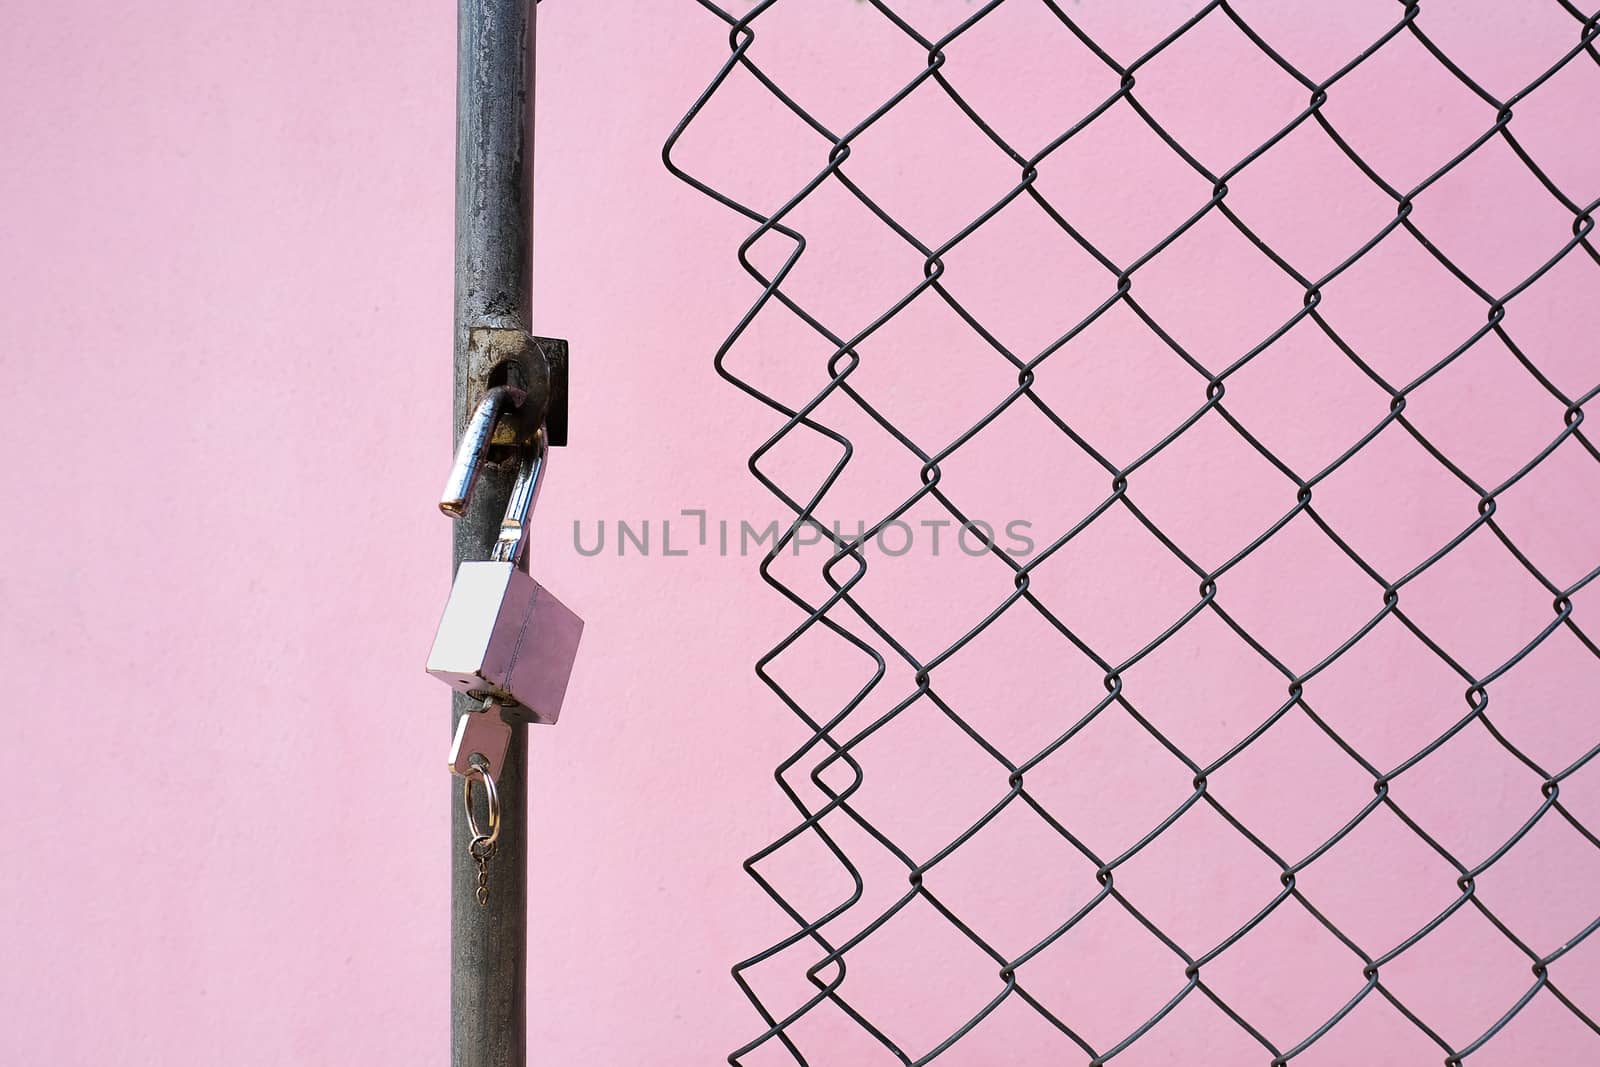 an old rusty metal padlock and a key at an opened wired gate in front of a pink colored concrete wall, security concepts